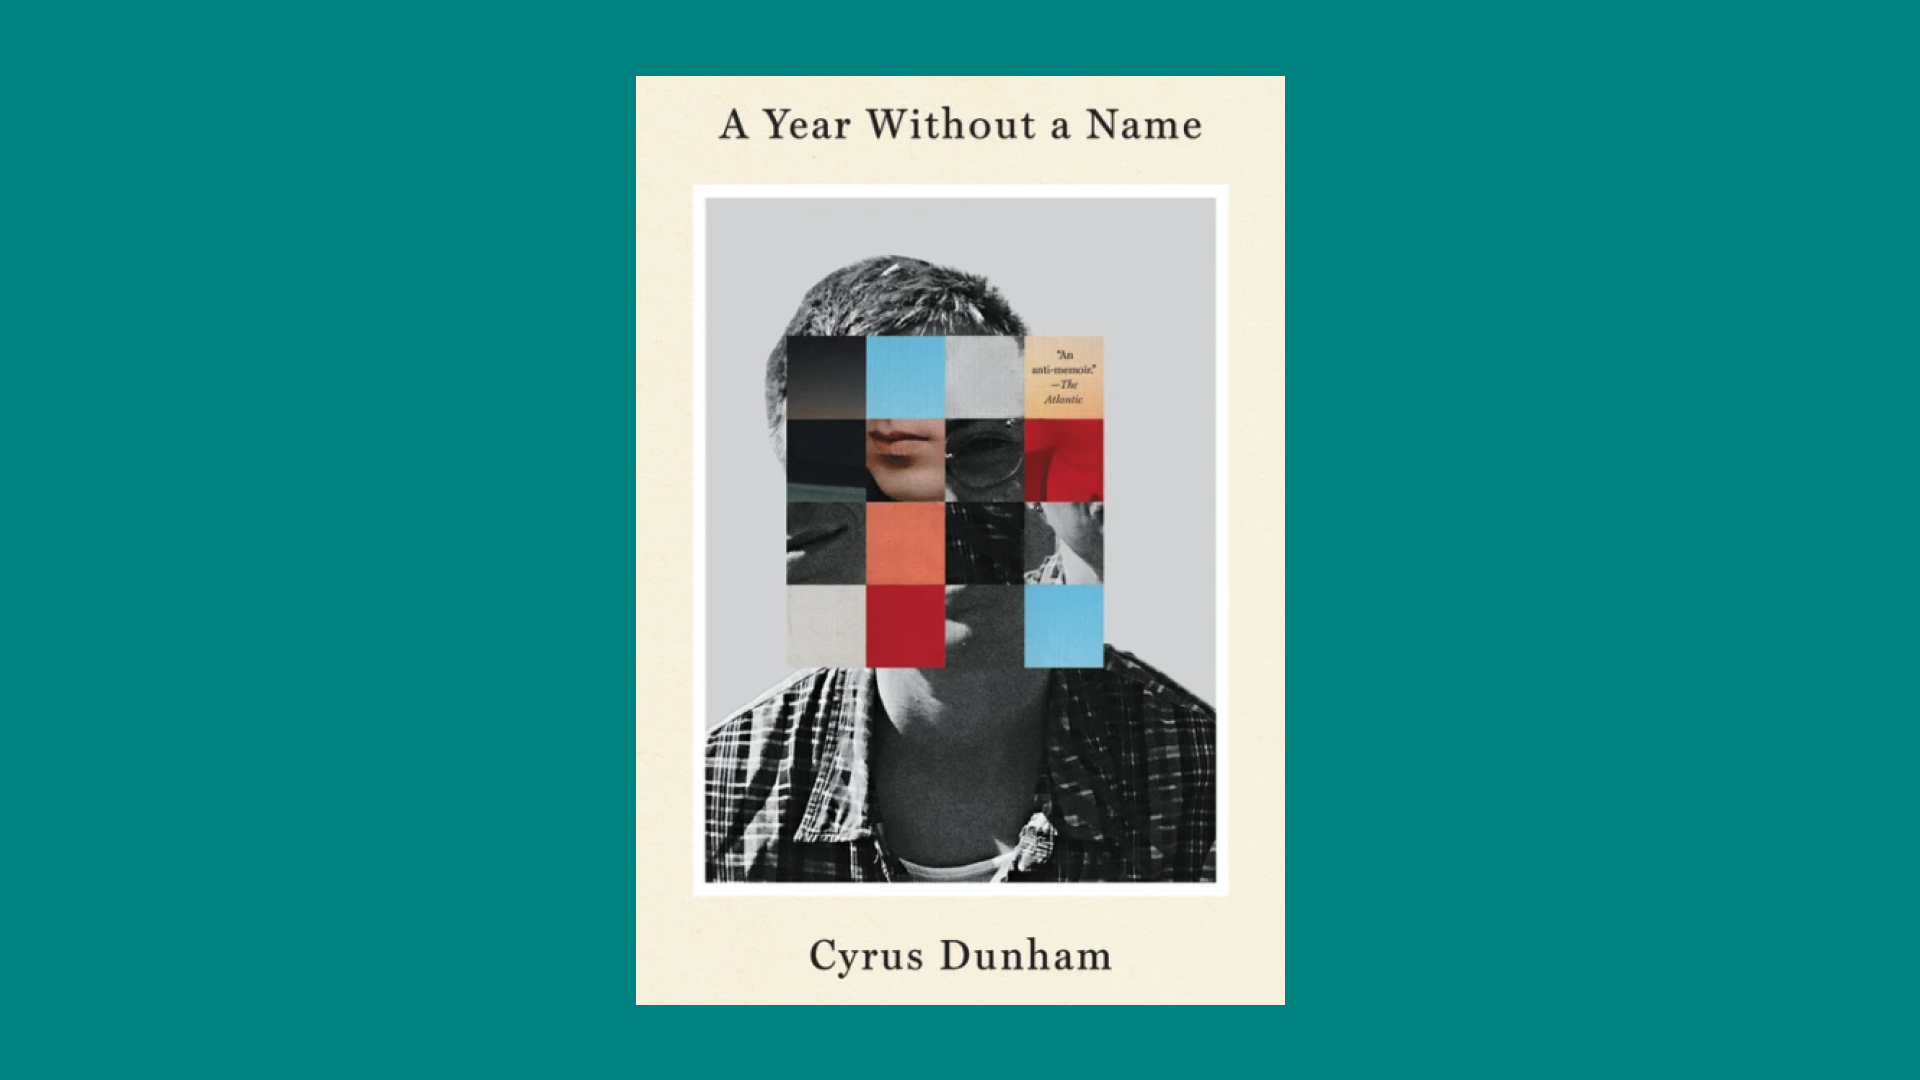 “A Year Without a Name” by Cyrus Dunham 